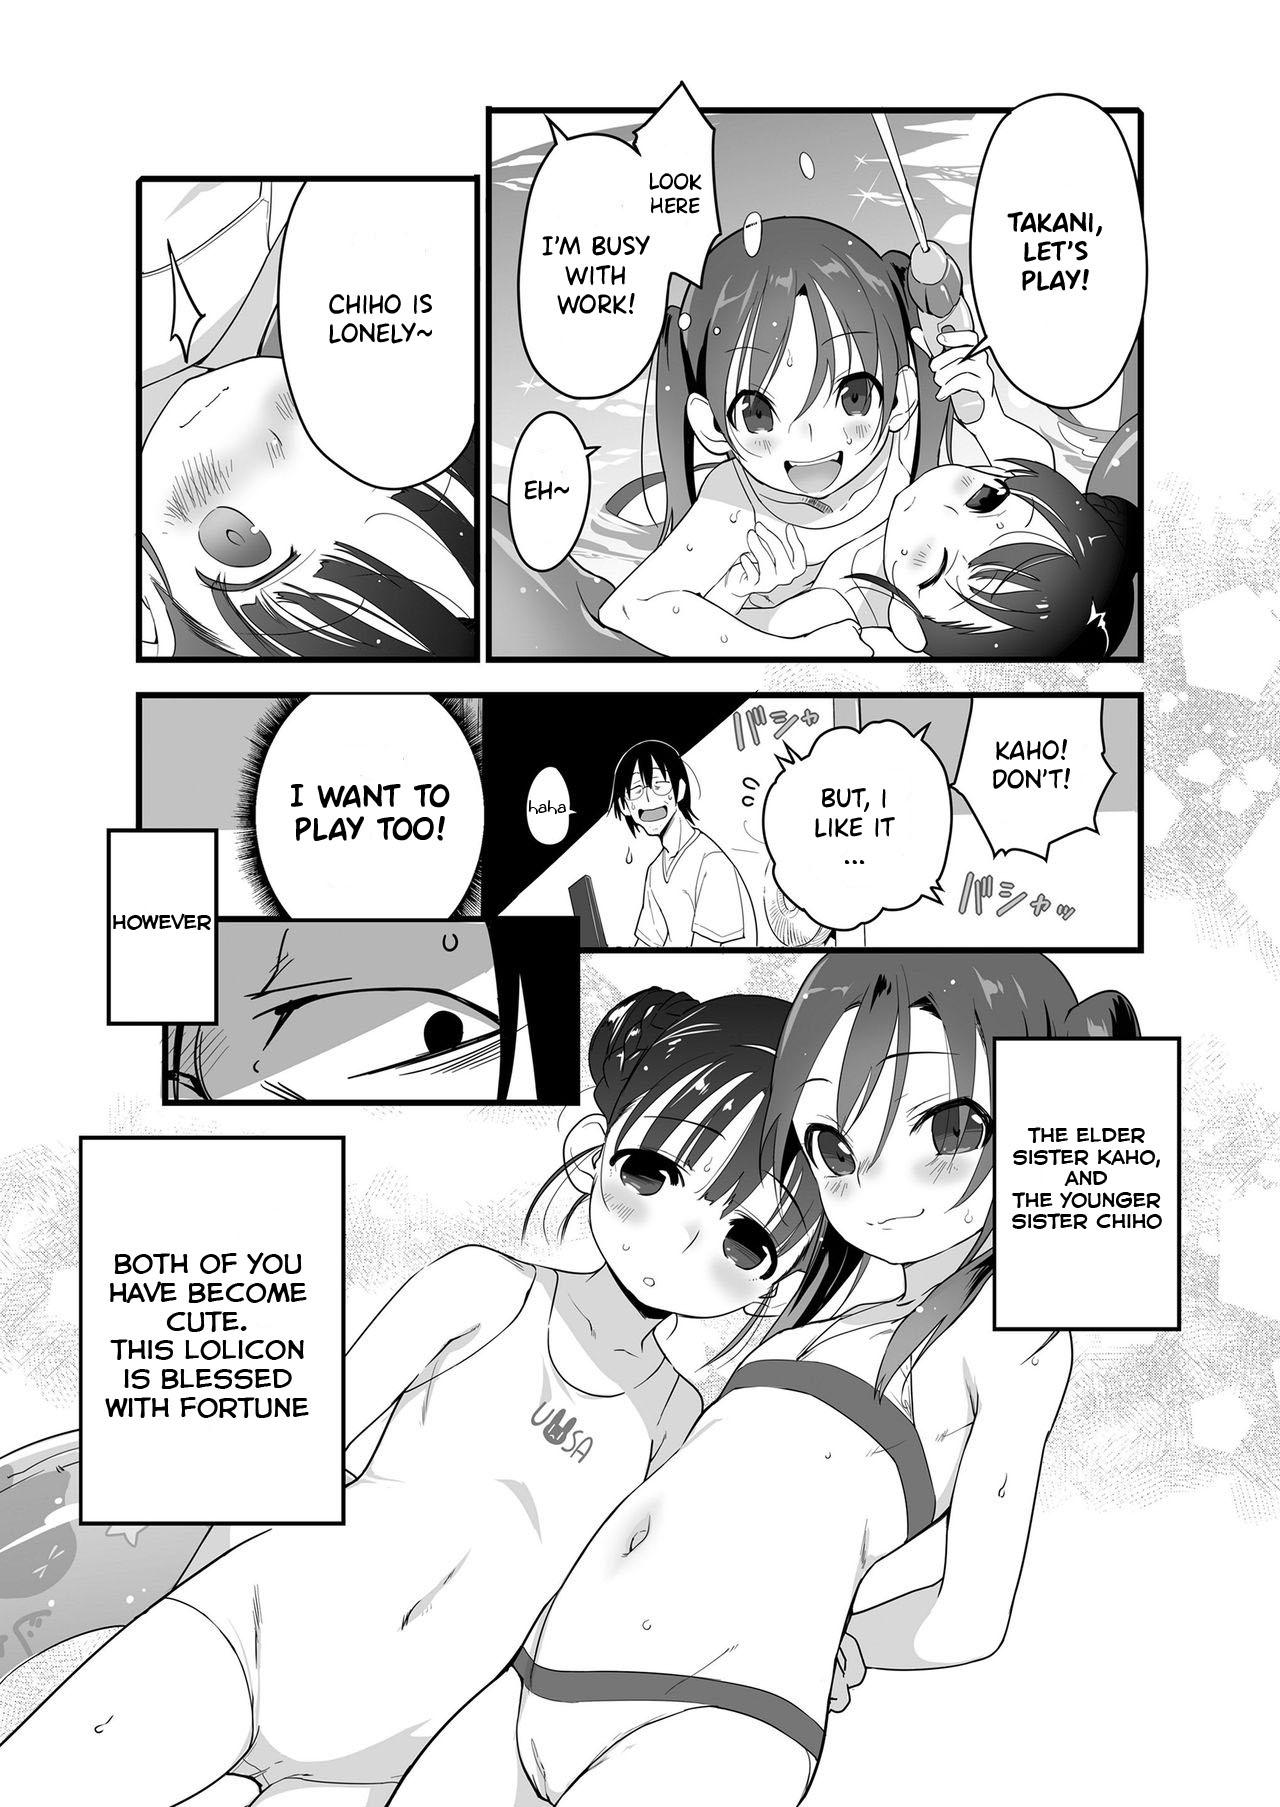 Sofa Uchiage Hanabi, Ane to Miruka? Imouto to Miruka? | Fireworks, Should we see it with the elder sister or the younger sister? Blondes - Page 3